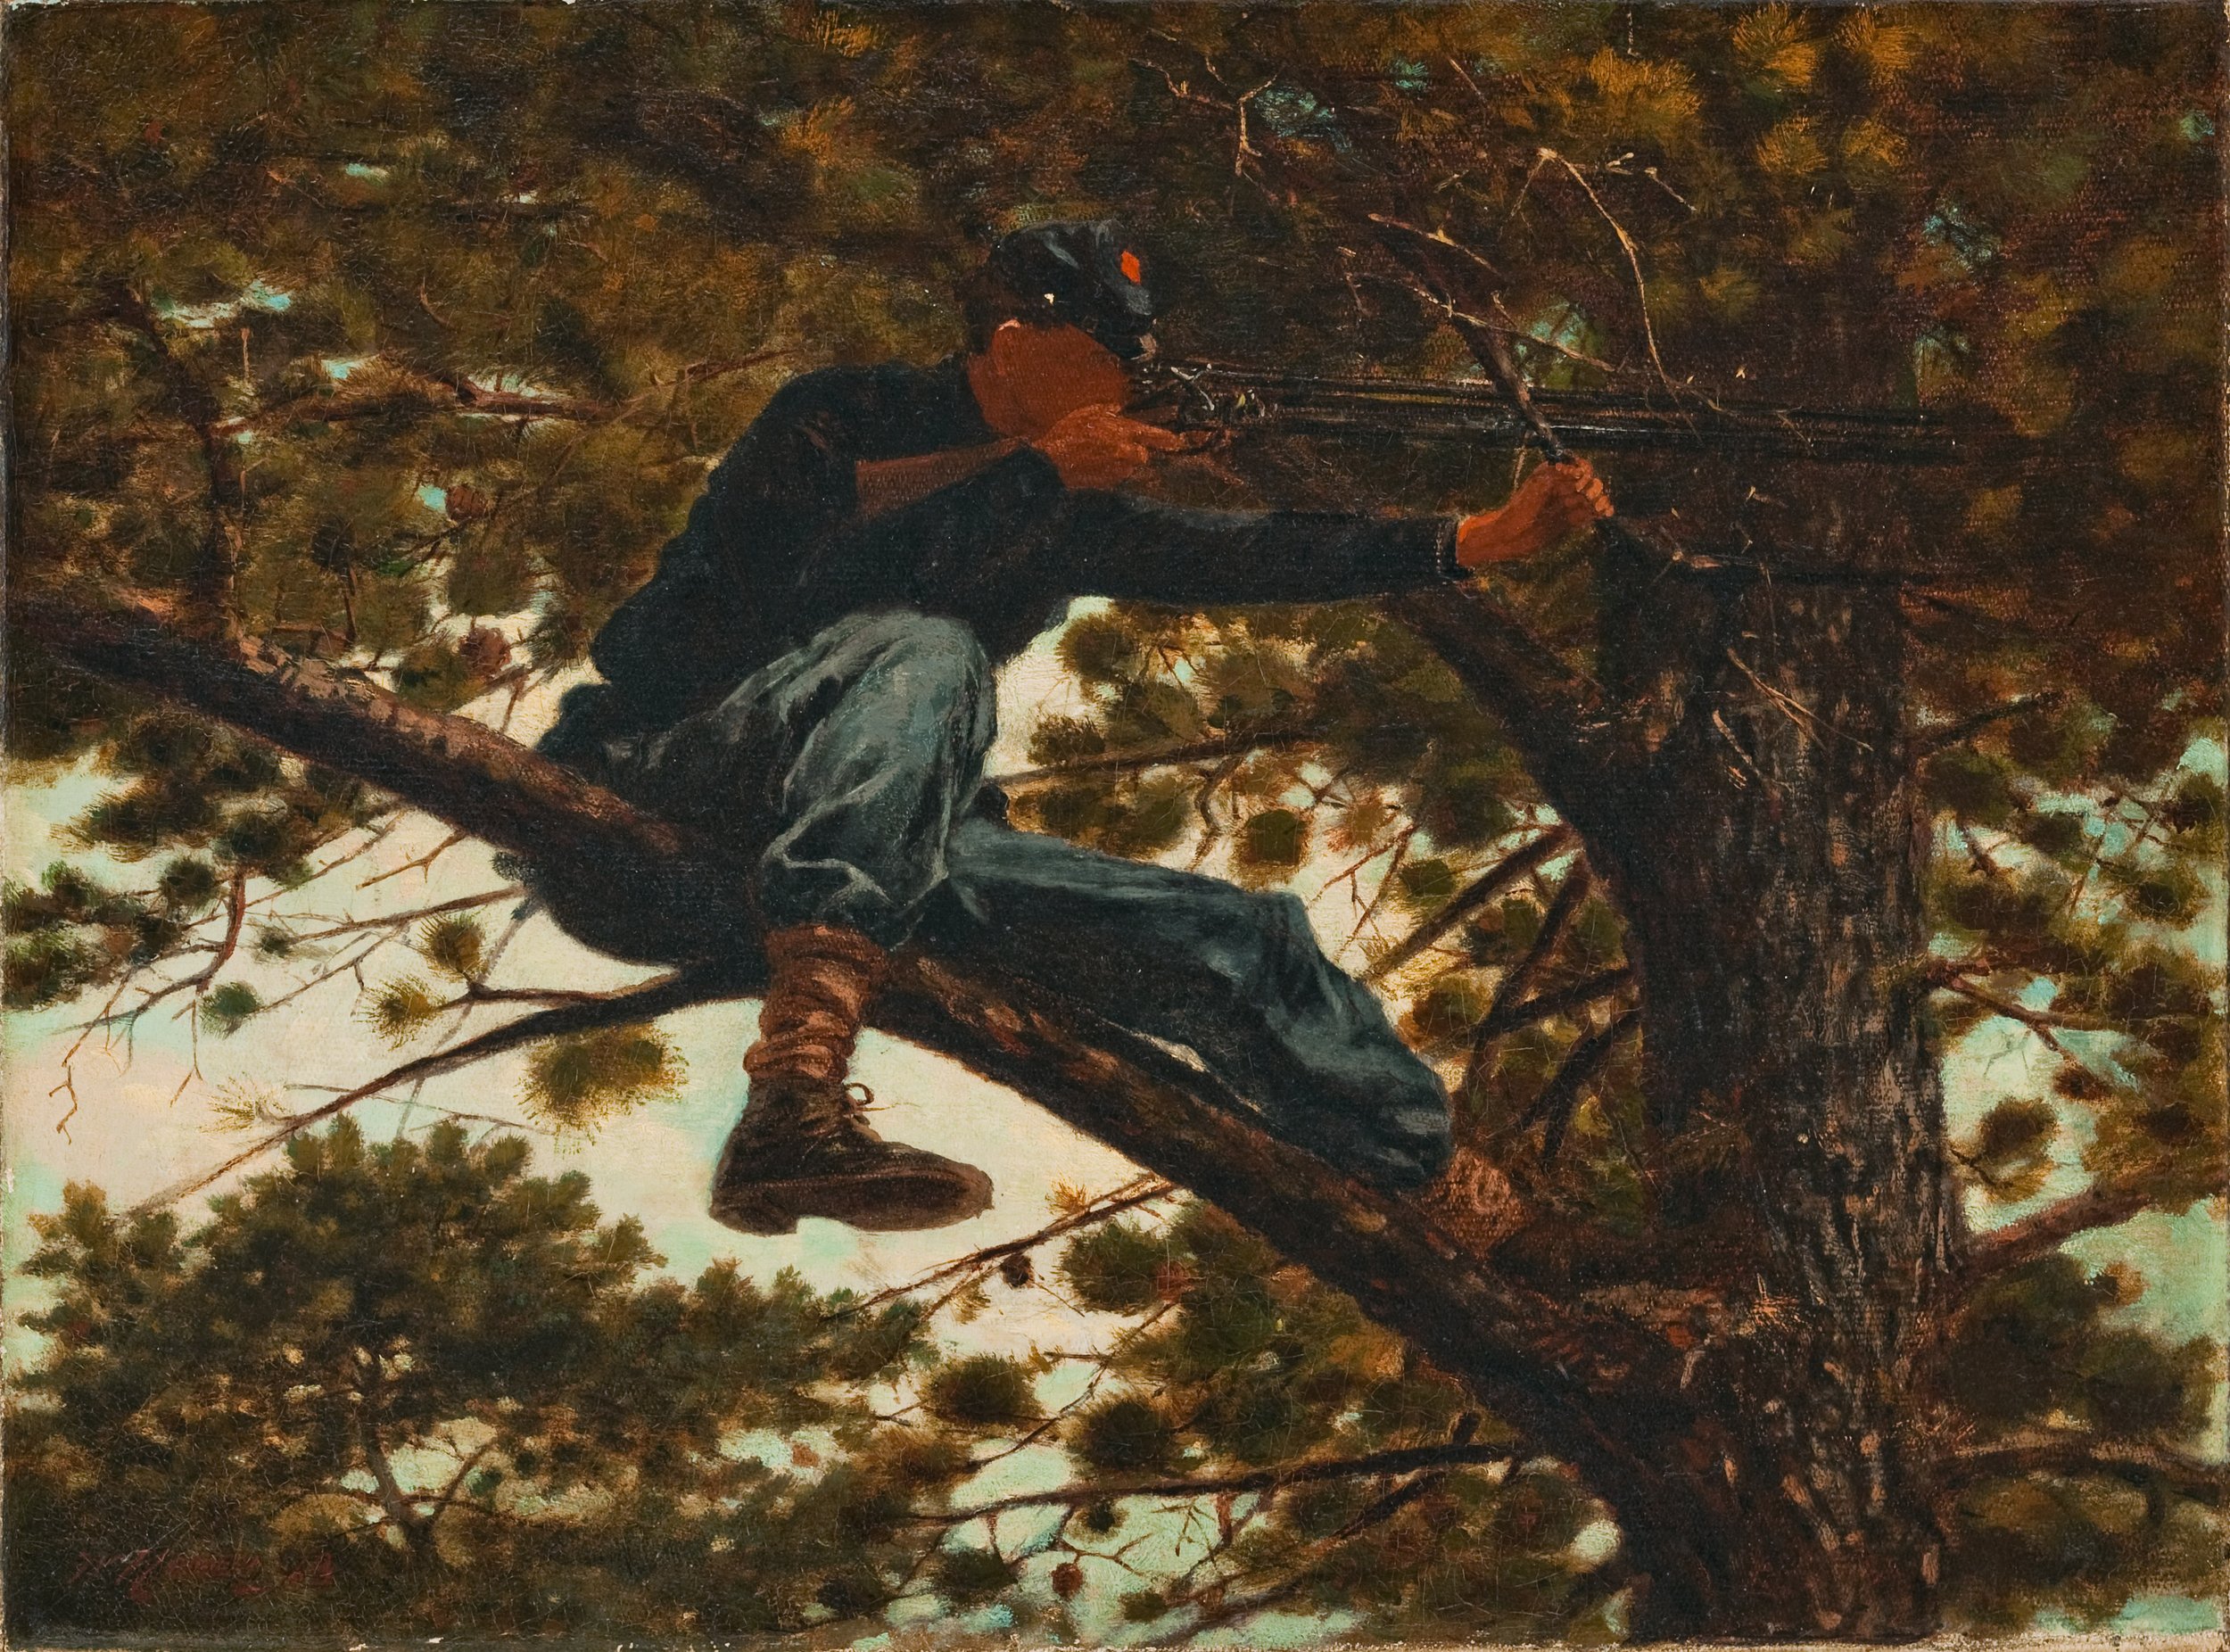   Winslow Homer   United States, 1836–1910  Sharpshooter , 1863 oil on canvas, 12 1/4 x 16 1/2 inches Gift of Barbro and Bernard Osher, 1992.41 